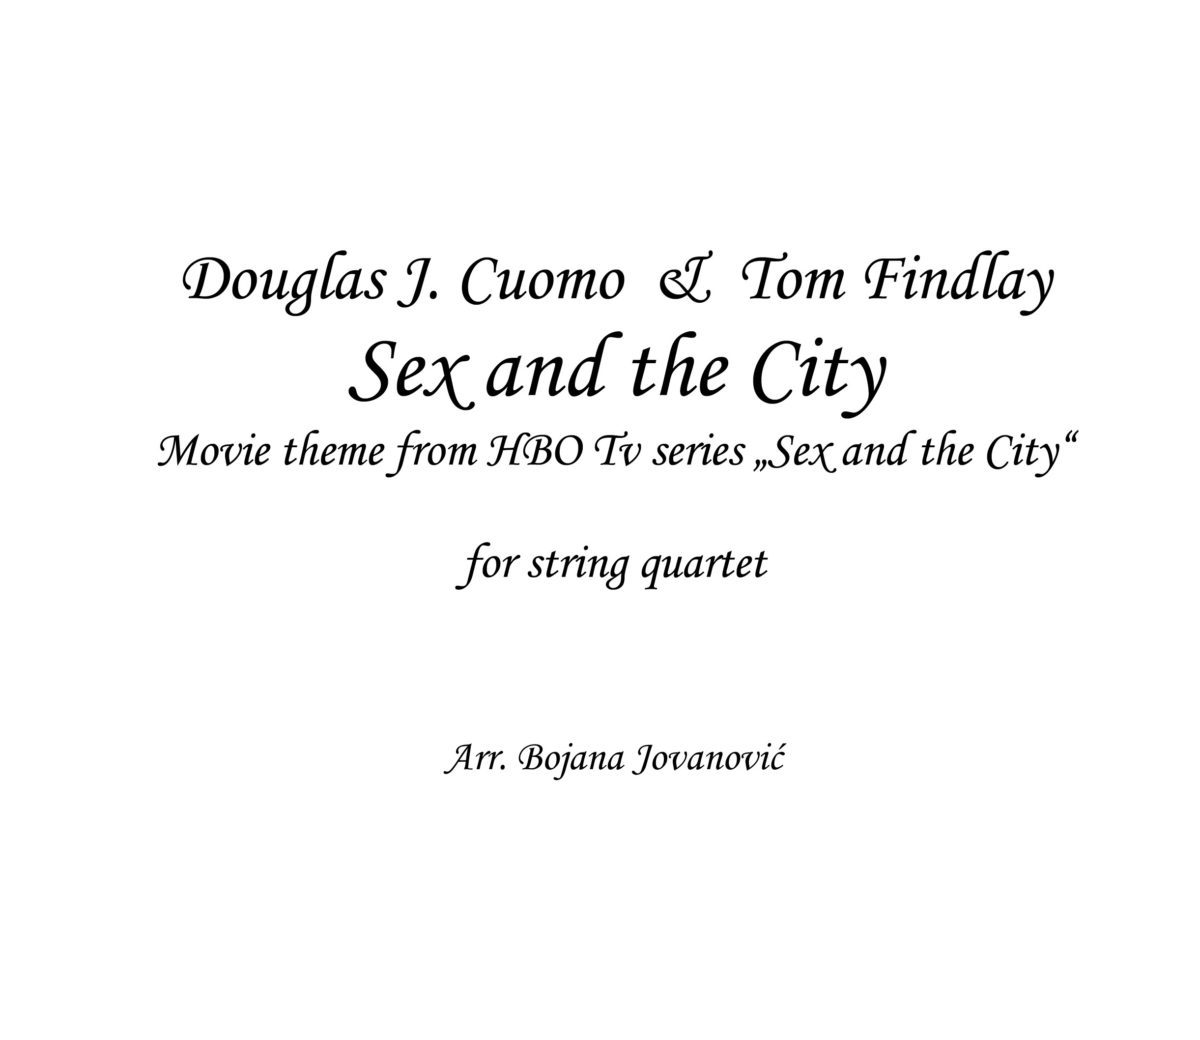 Sex and the City Sheet music - opening theme